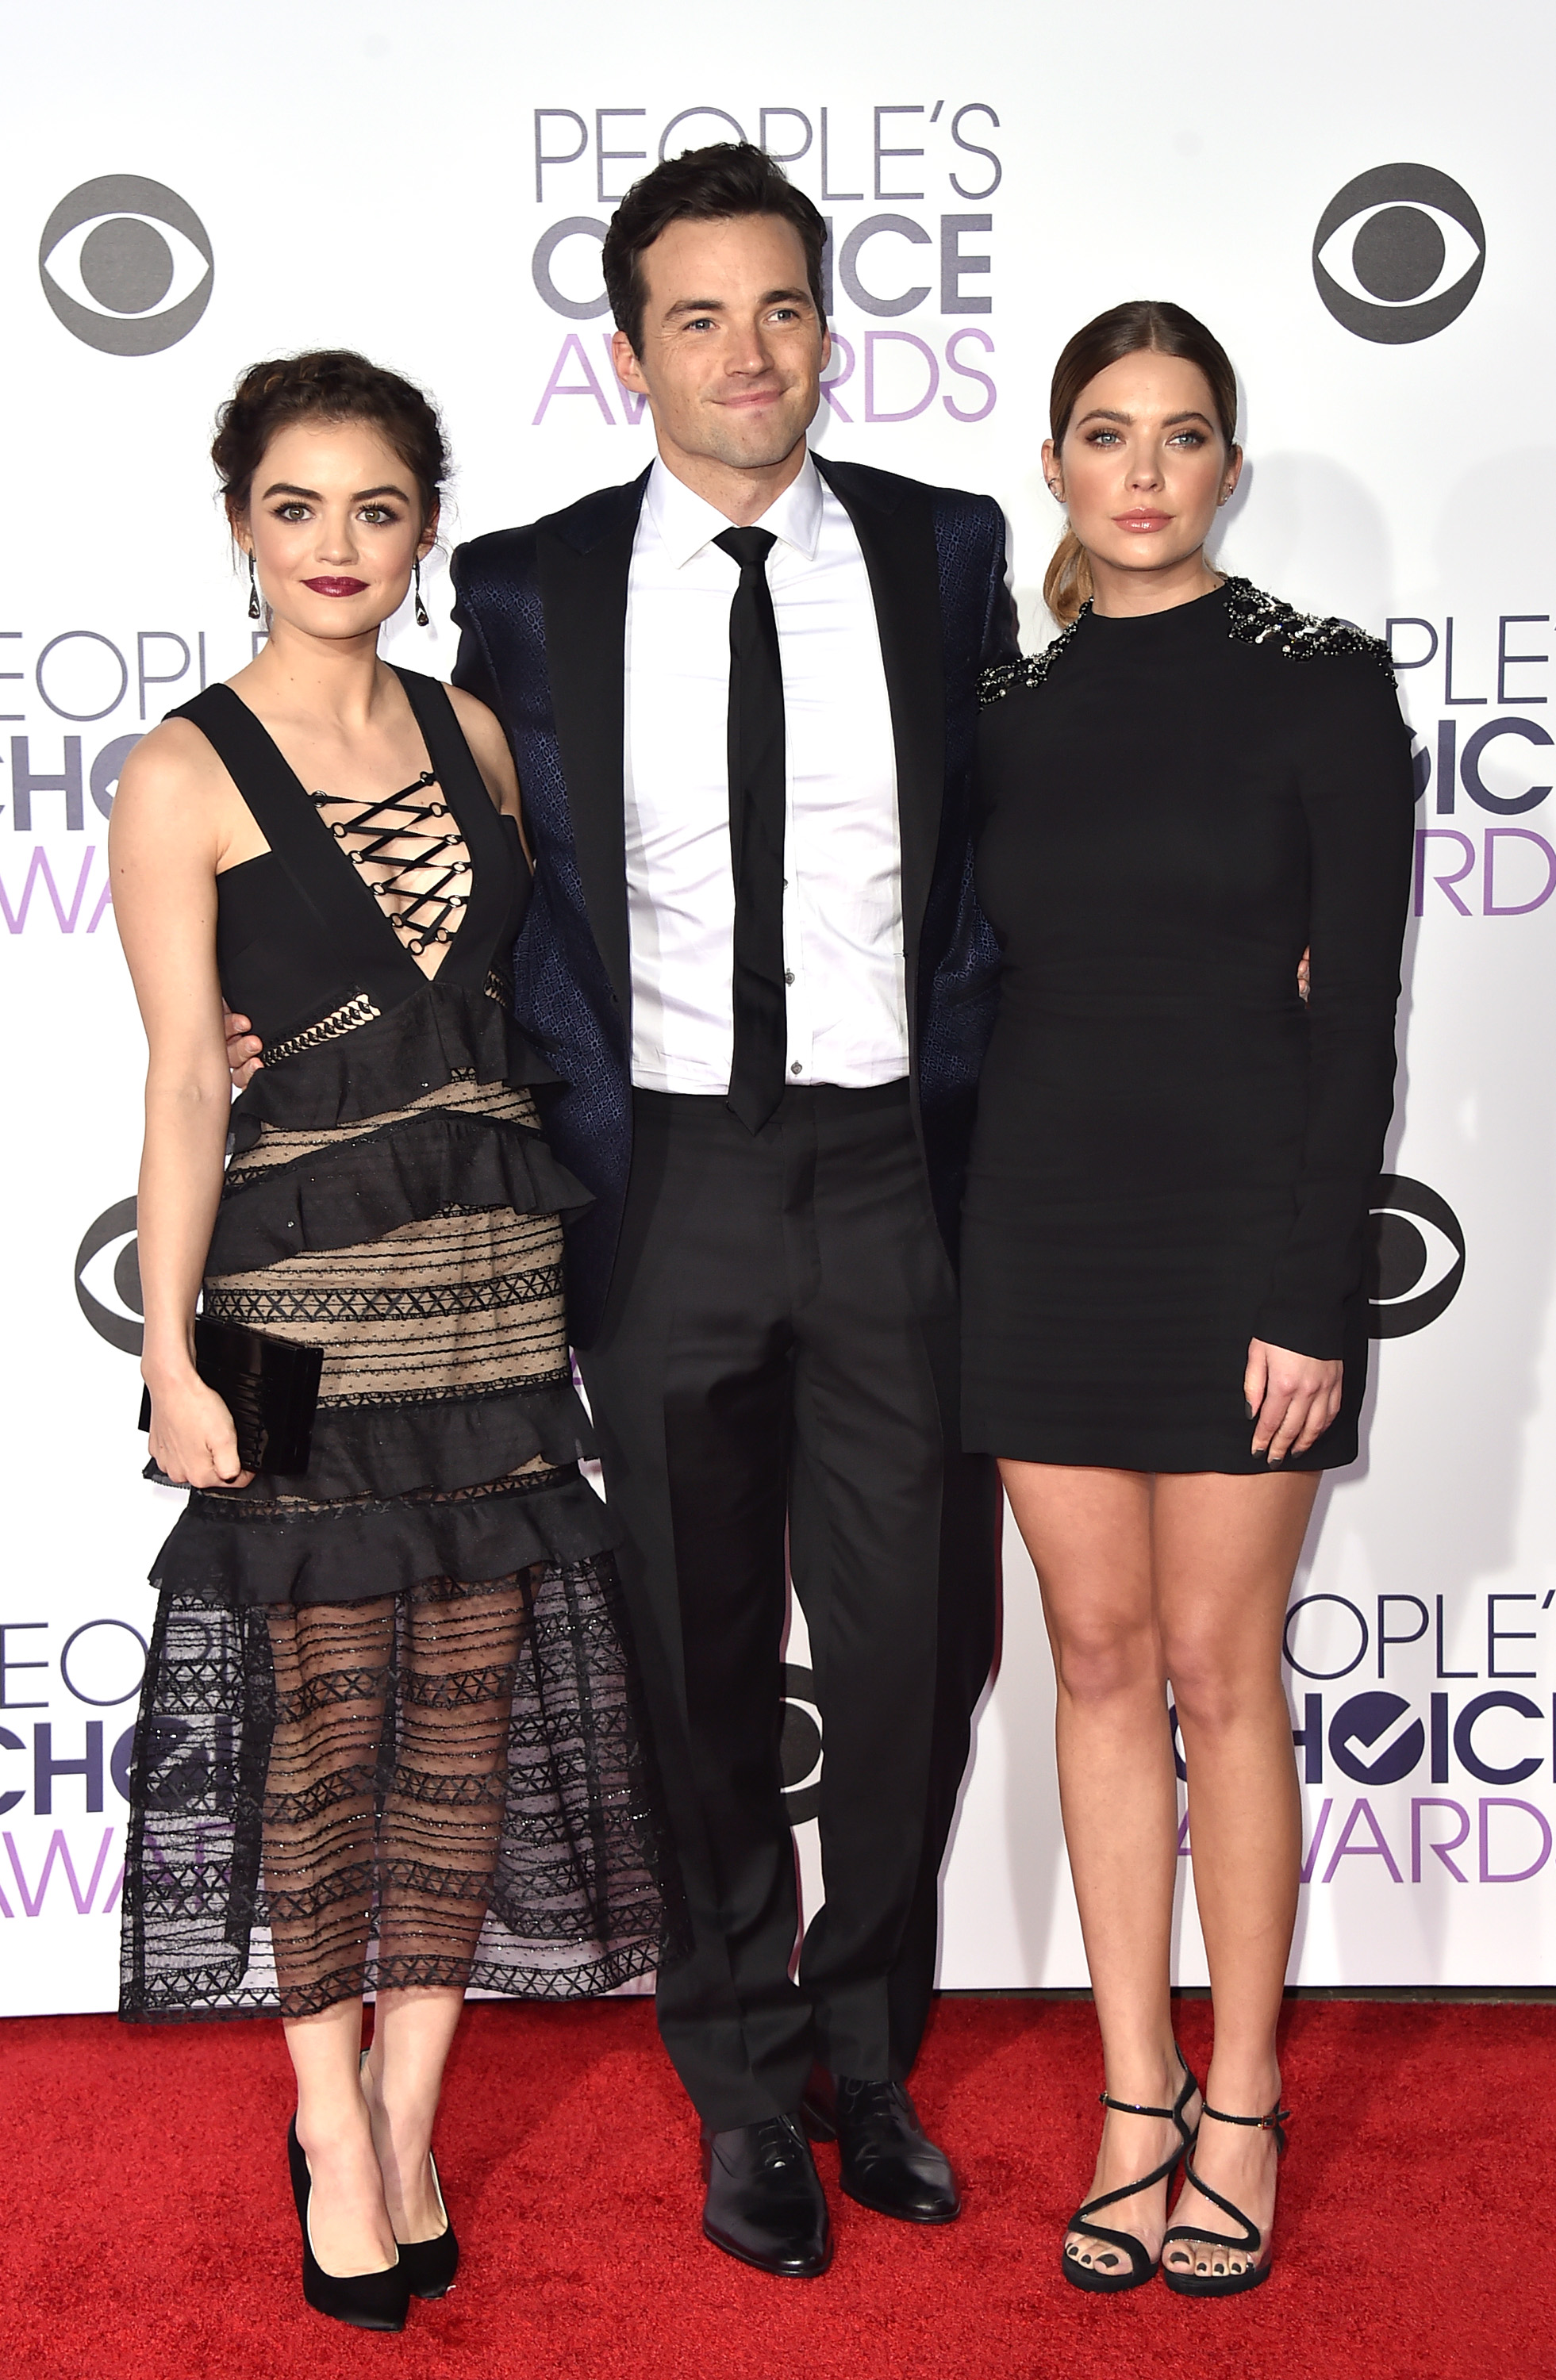 Lucy Hale in People's Choice Awards 2015 